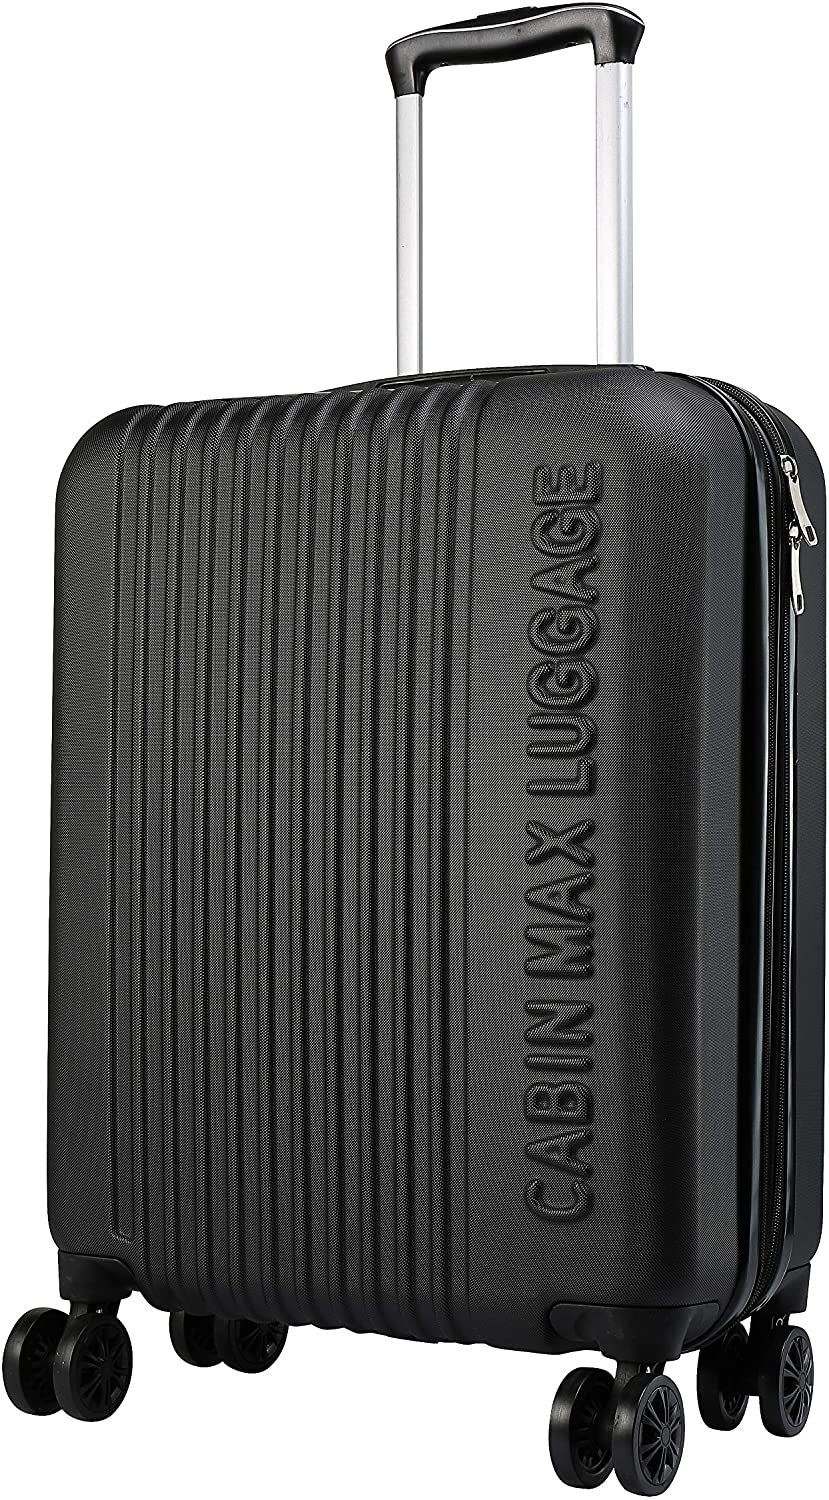 Cabin Max Velocity - Easyjet LARGE cabin luggage